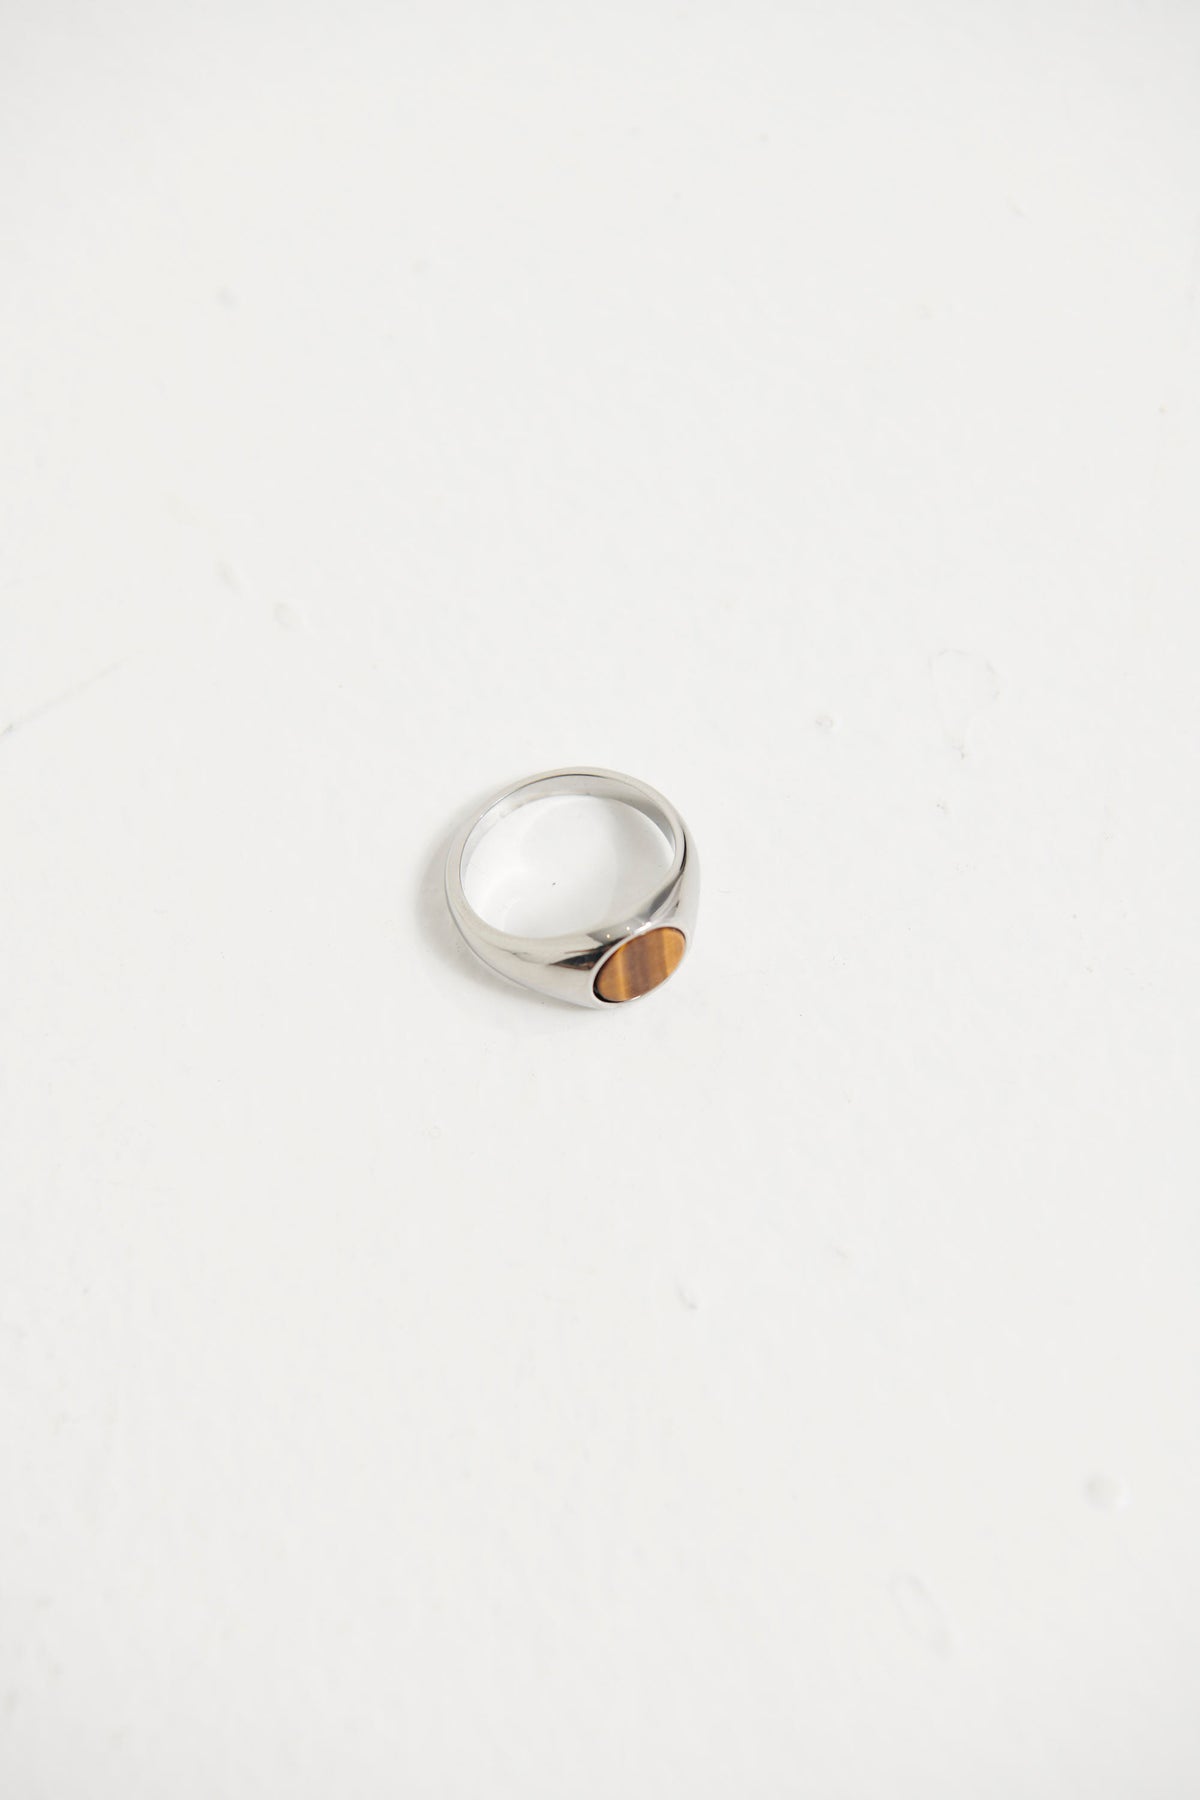 NTH Signet Ring Brown/Silver